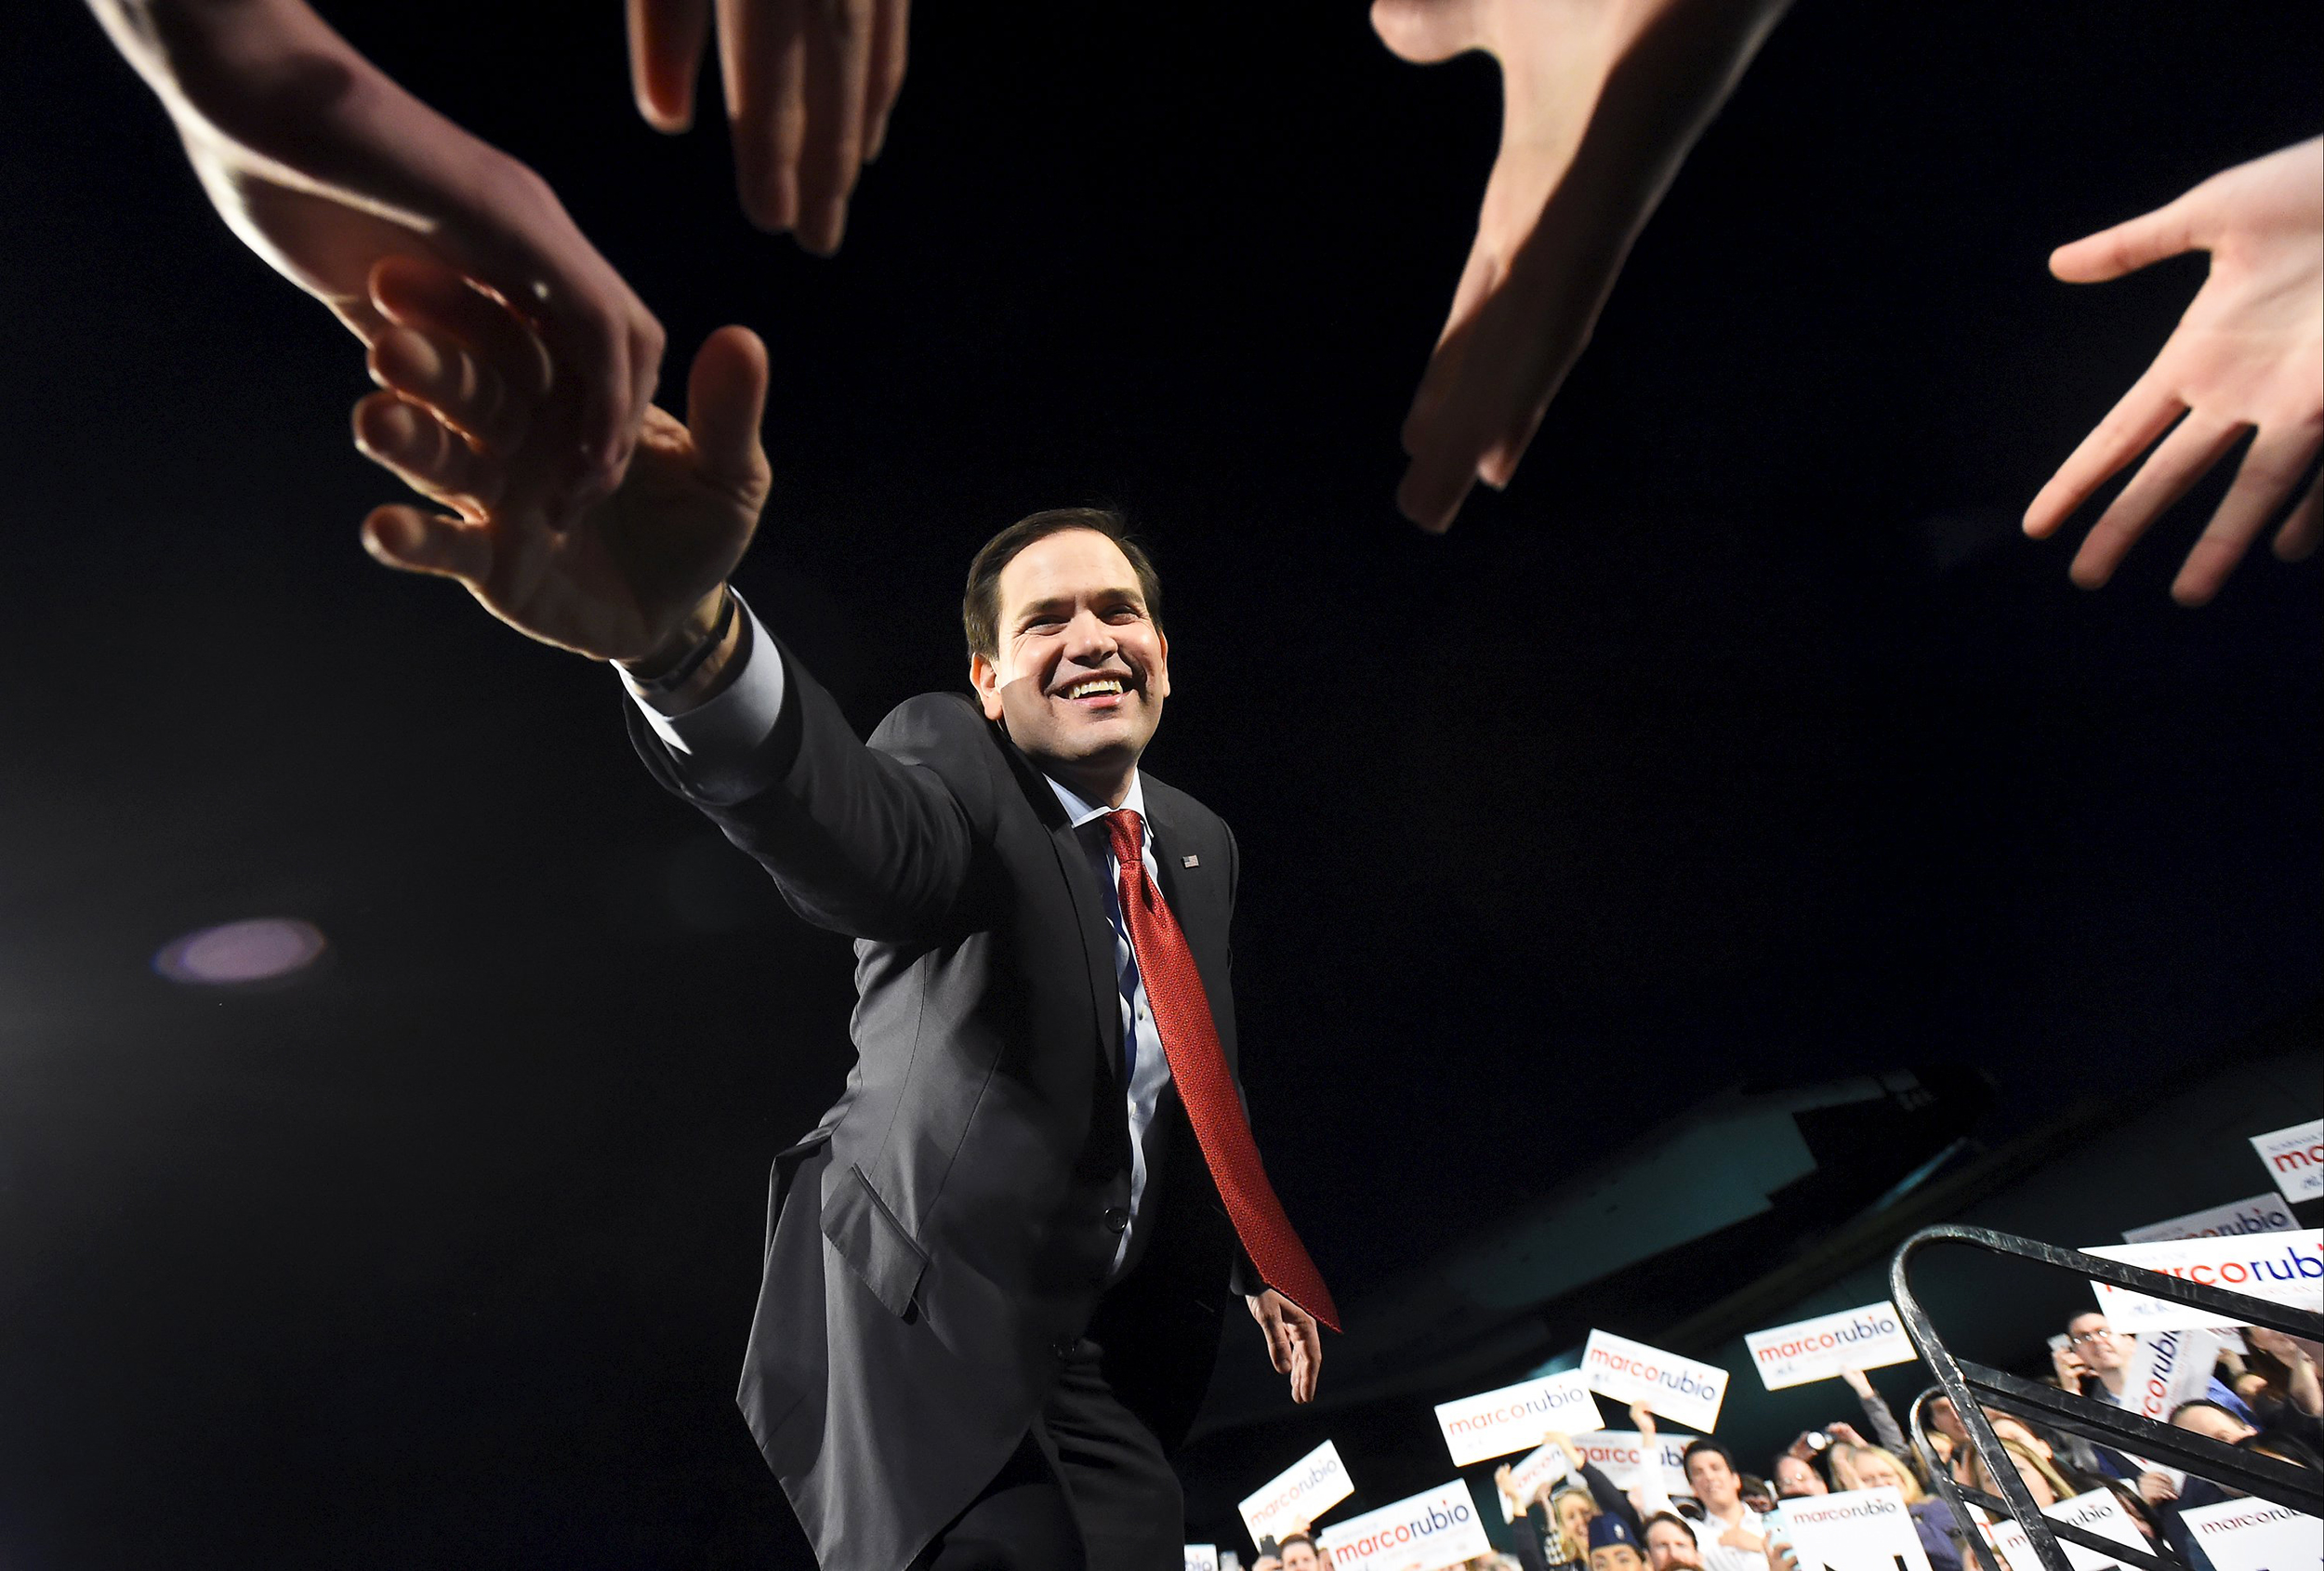 Marco Rubio greets supporters during a campaign stop at the U.S. Space and Rocket Center in Huntsville, Alabama on  Feb. 27, 2016. (Harrison McClary—Reuters)